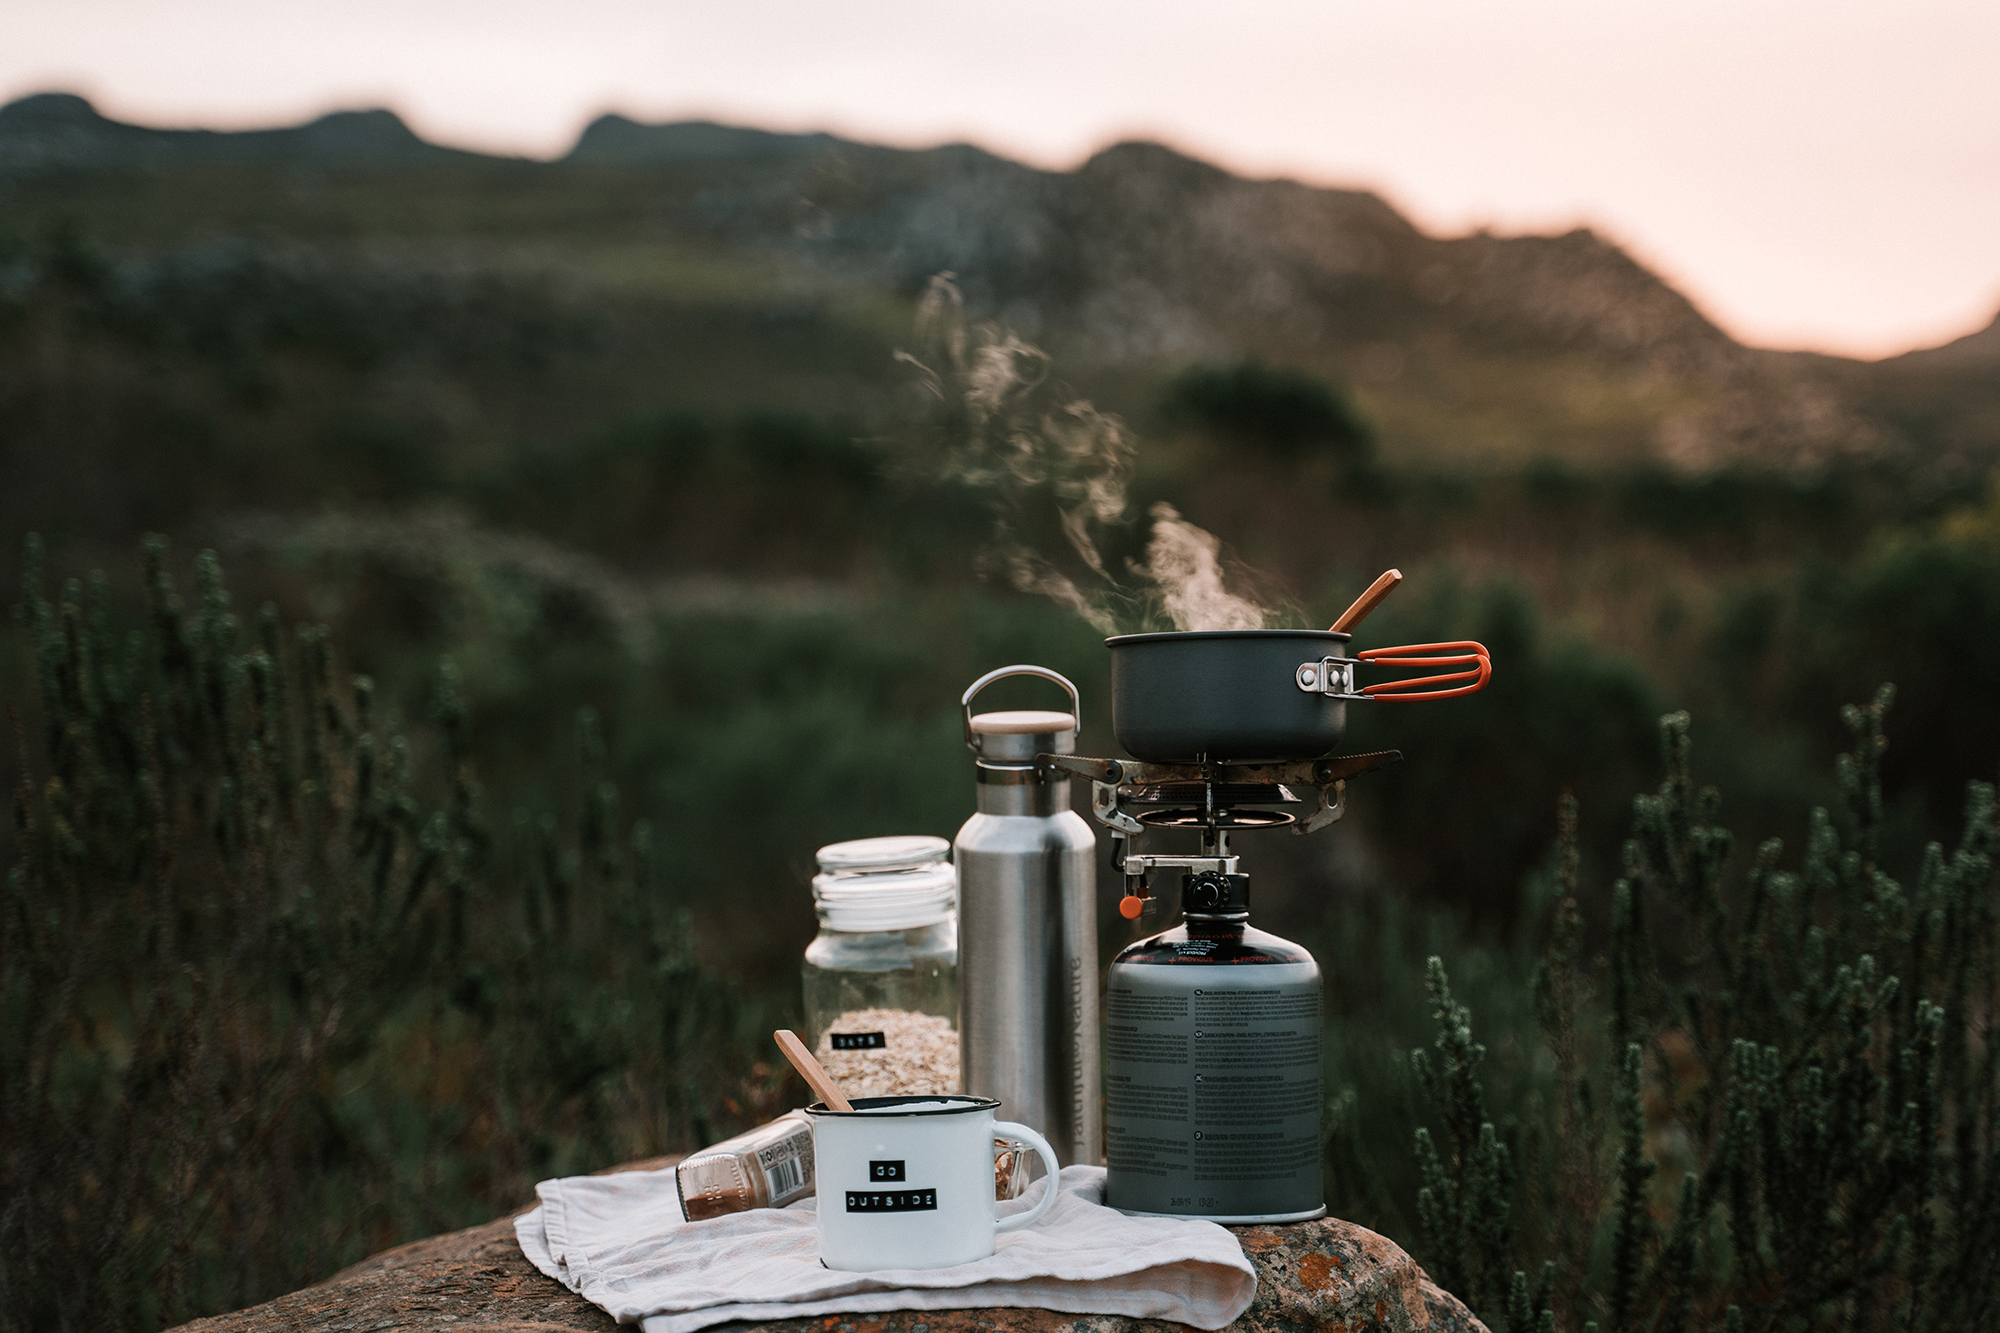 Camping stove with items to make a hot drink. Photo: Taryn Elliot via Pexels